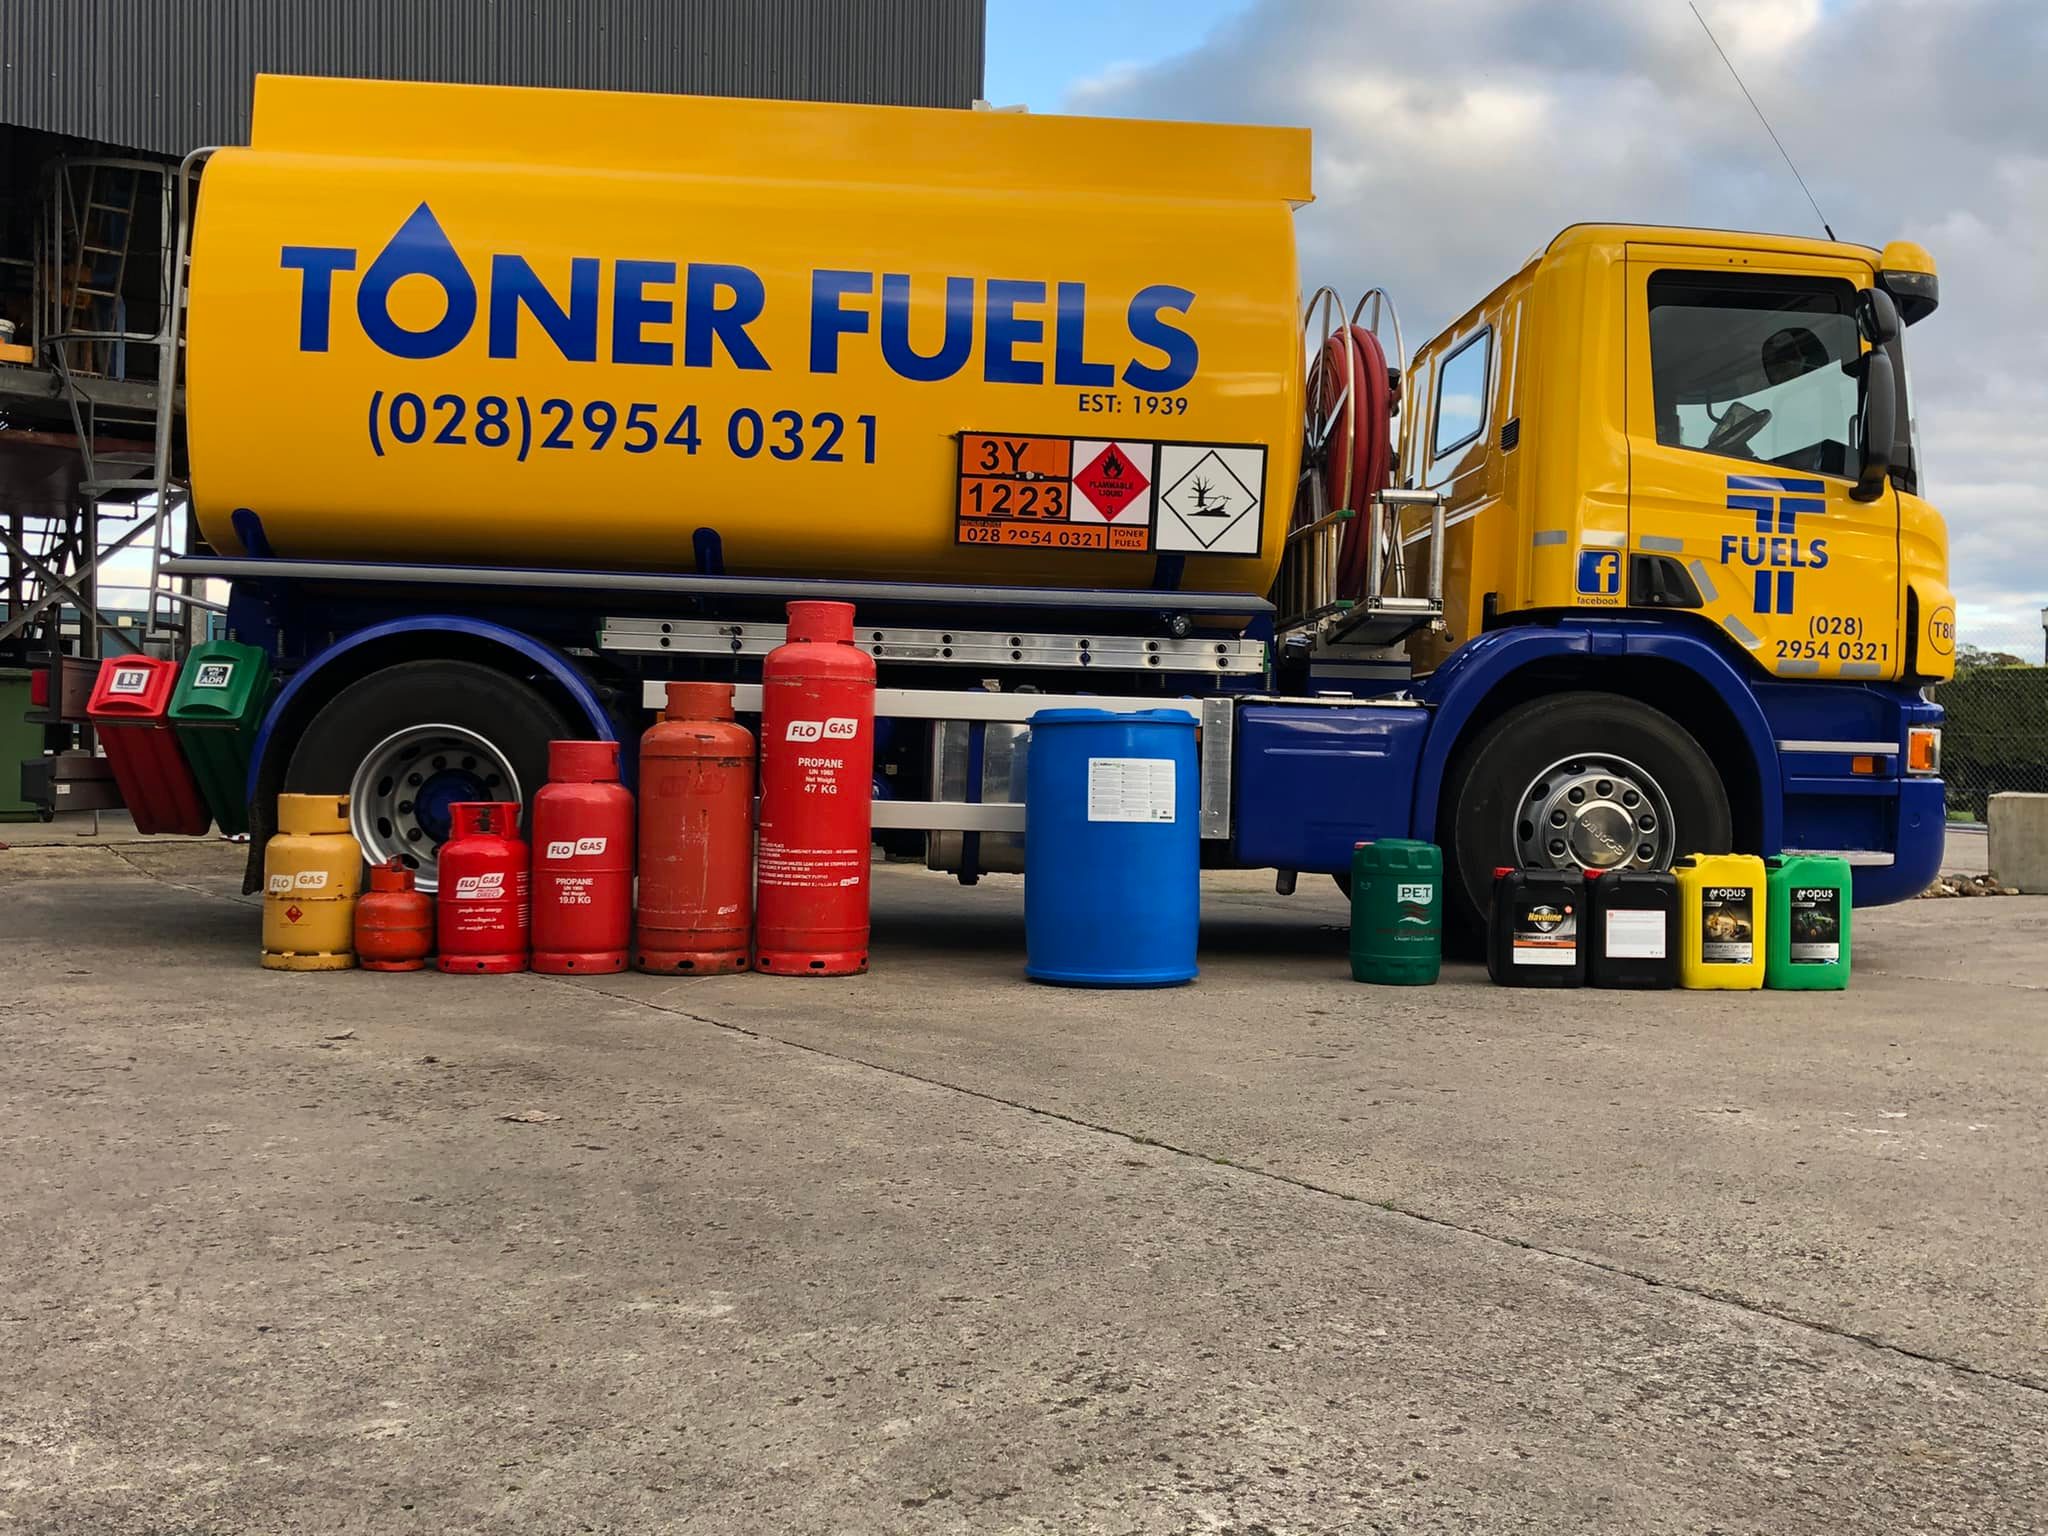 Toner fuels gas canister supply